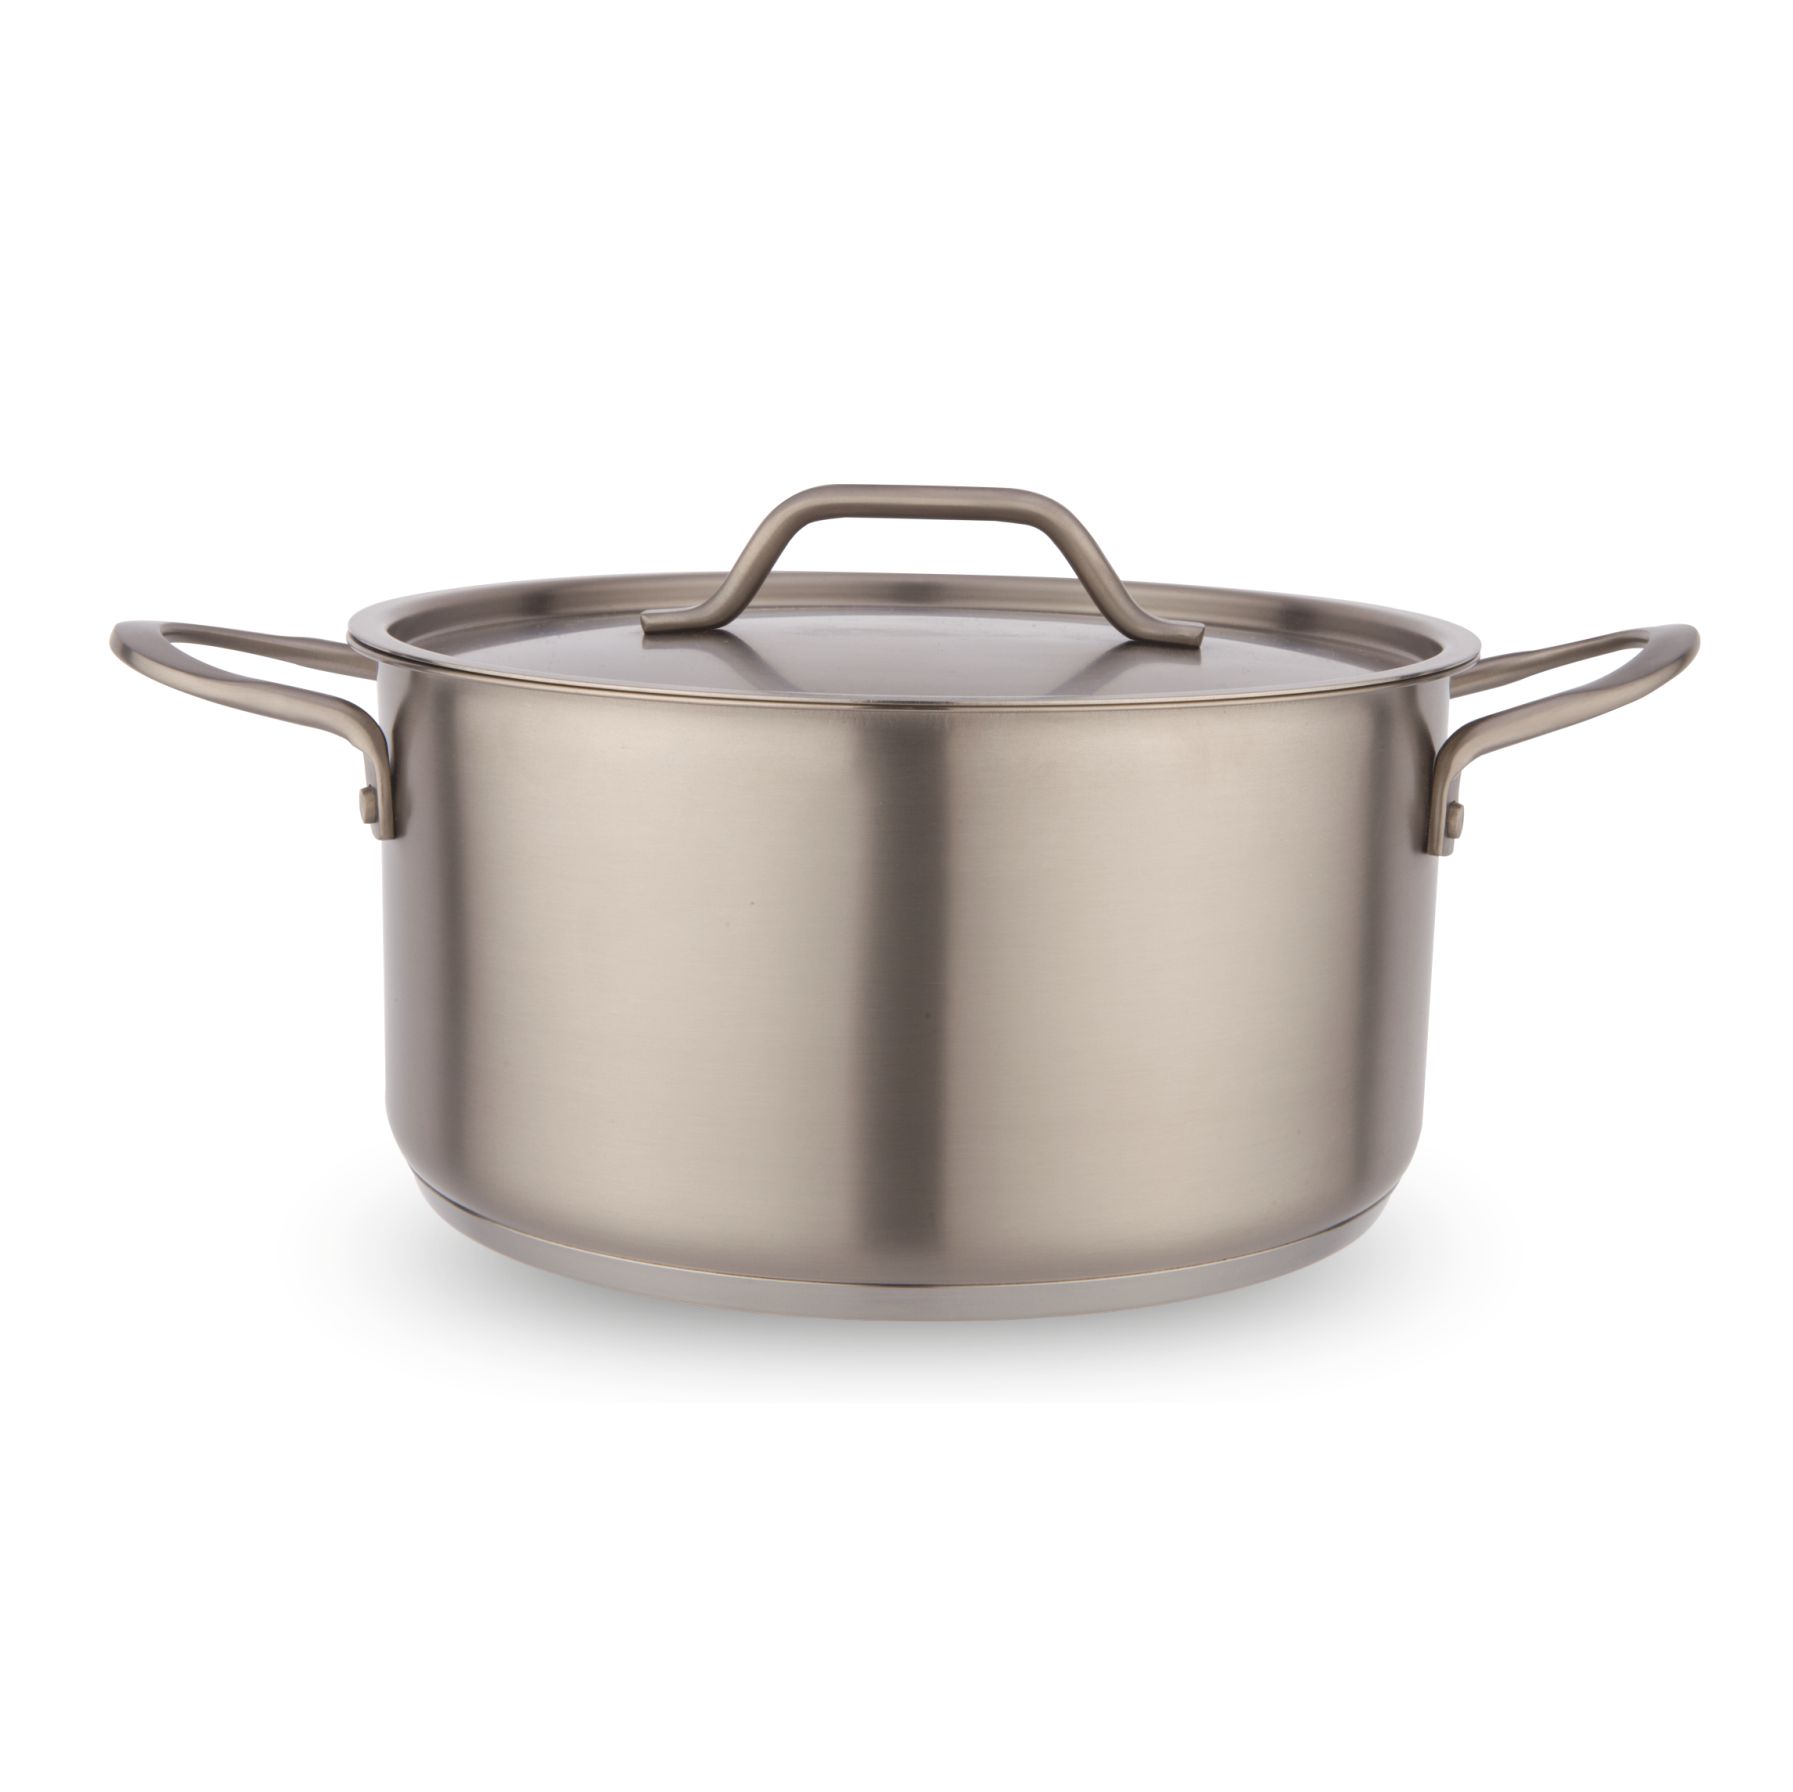 Hot Sale 2-Person Stainless Steel Tableware Casserole